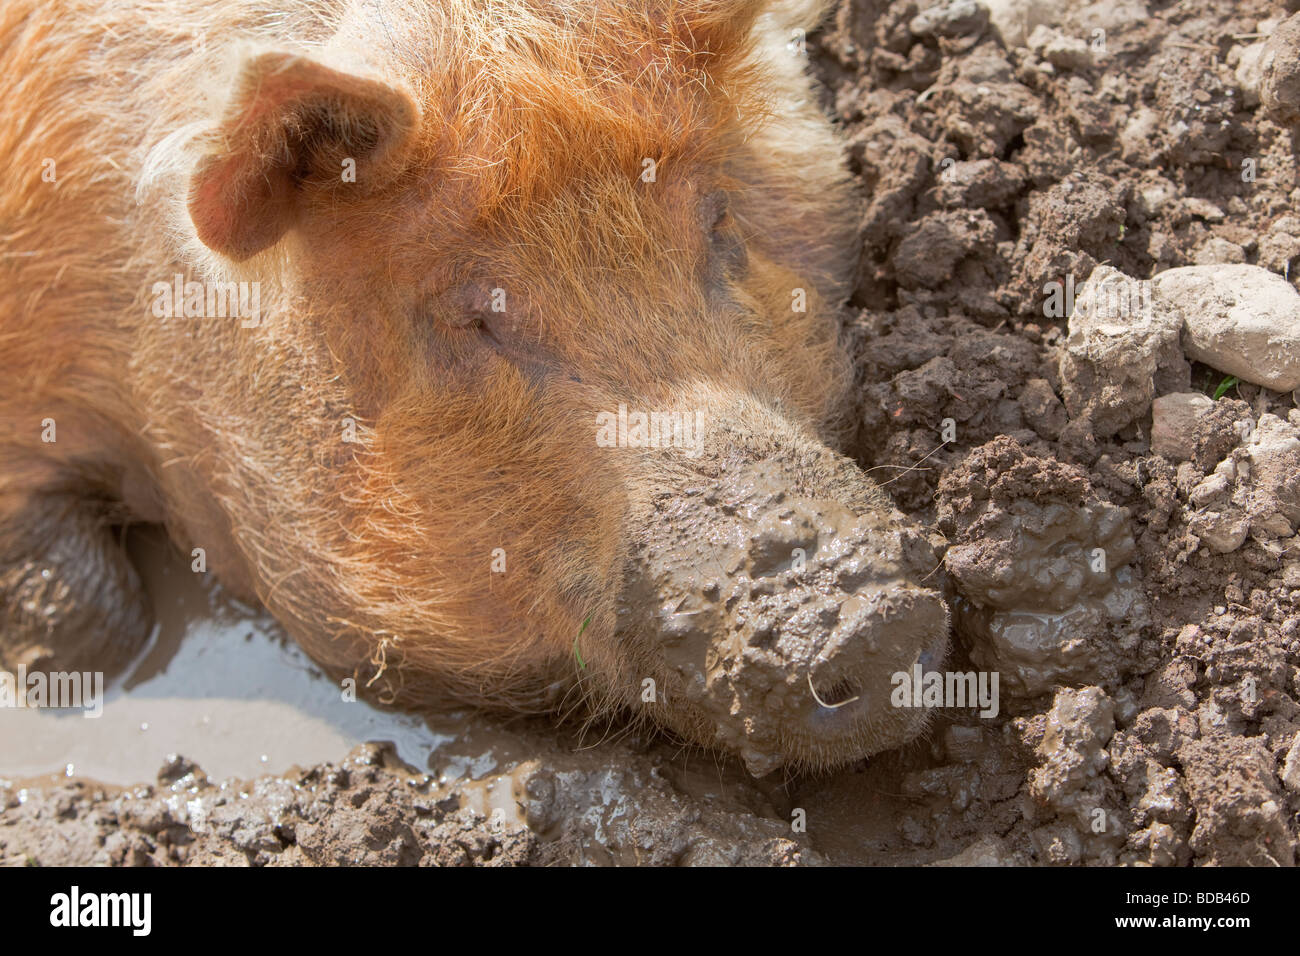 Tamworth rare breed sow pig wallowing in mud Stock Photo